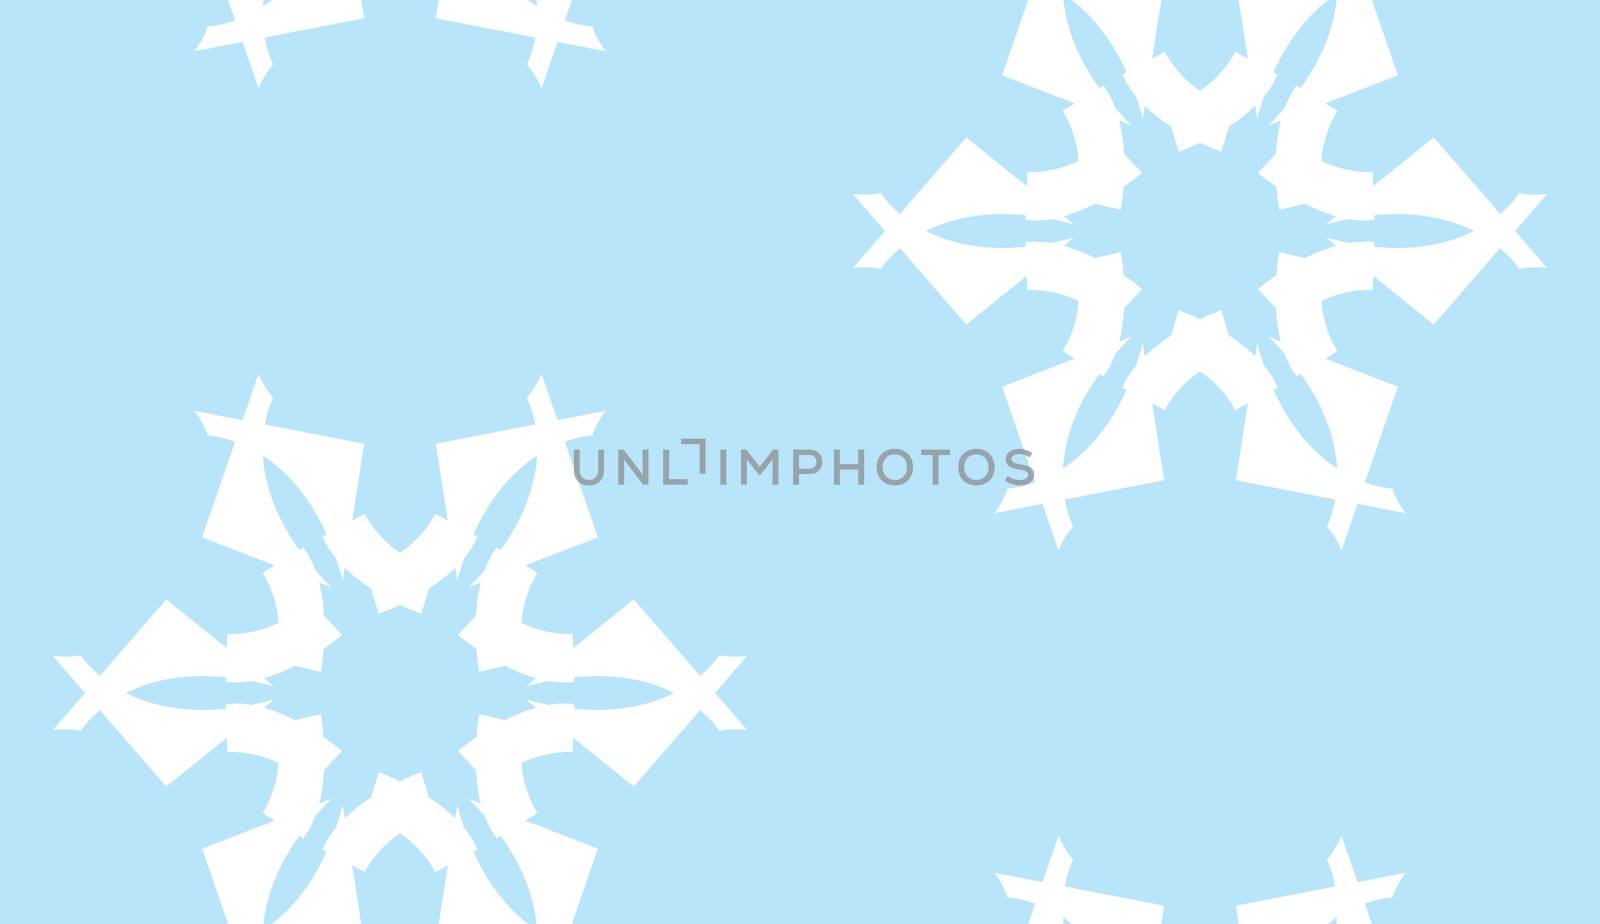 Blue background of repeating large snowflake shapes